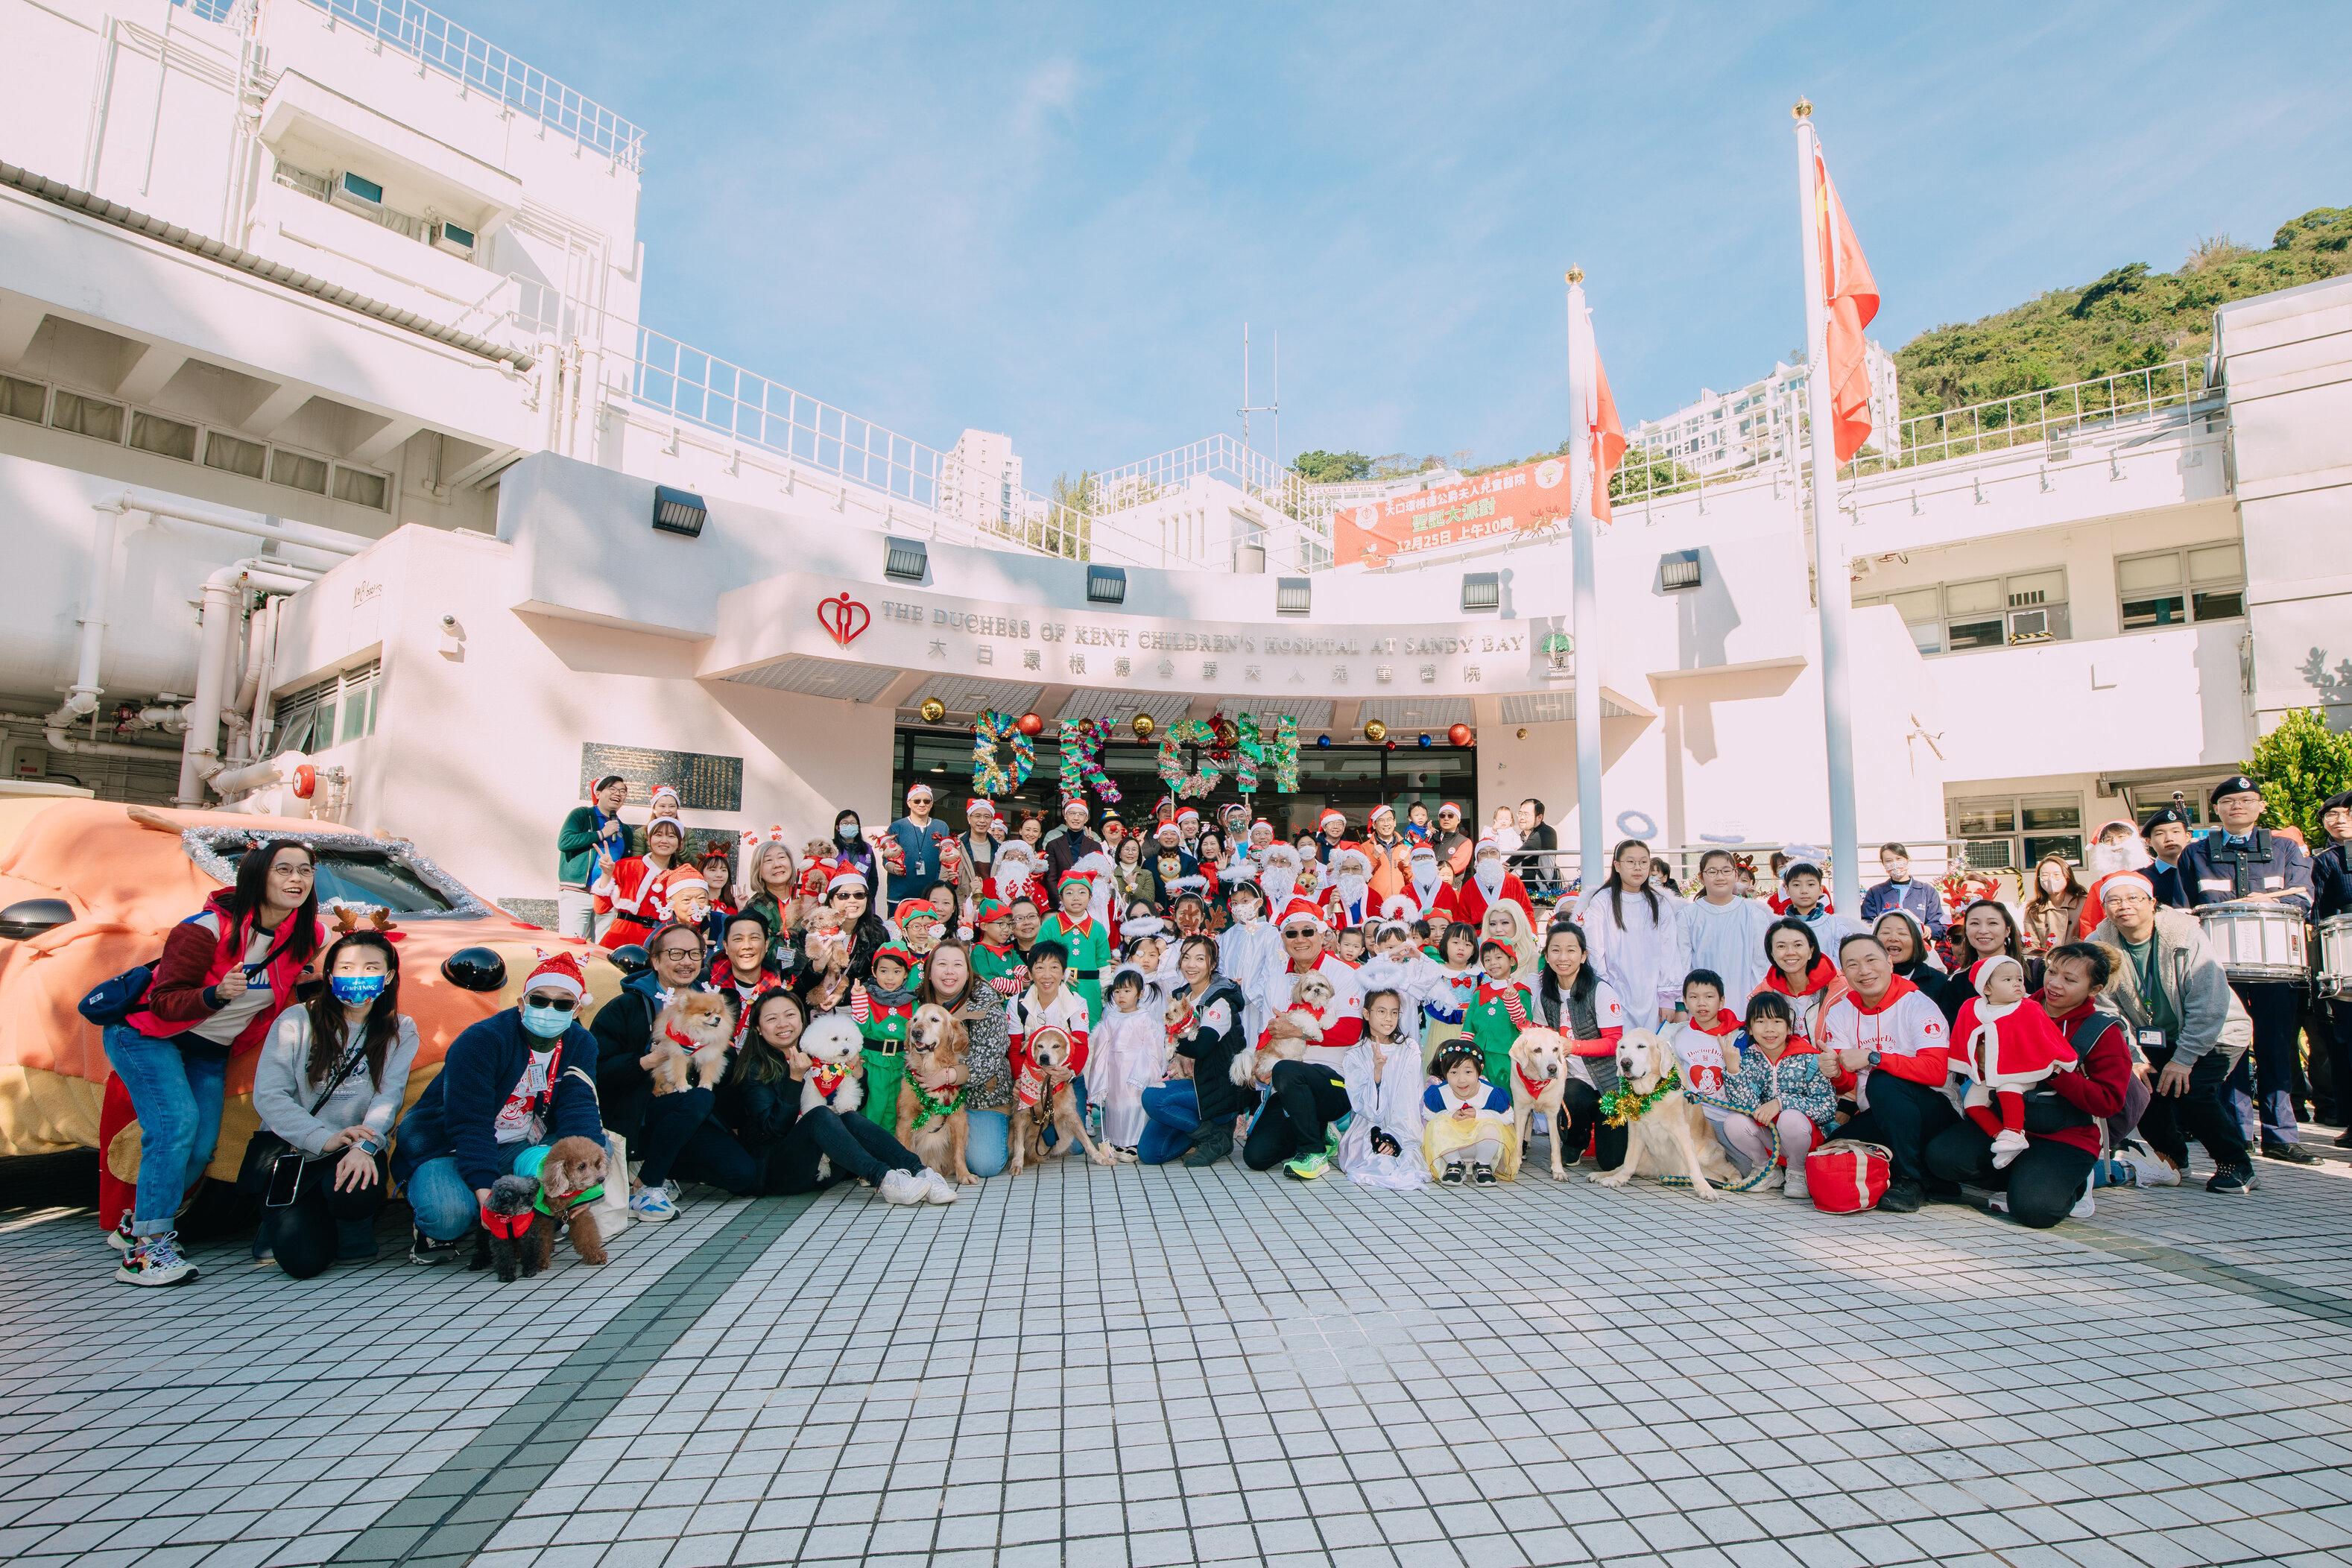 The Duchess of Kent Children's Hospital held a party, where a group of dog doctors accompanied the sick children to watch performances and took photos with healthcare professionals dressing as cartoon characters, spending a festive moment together.
